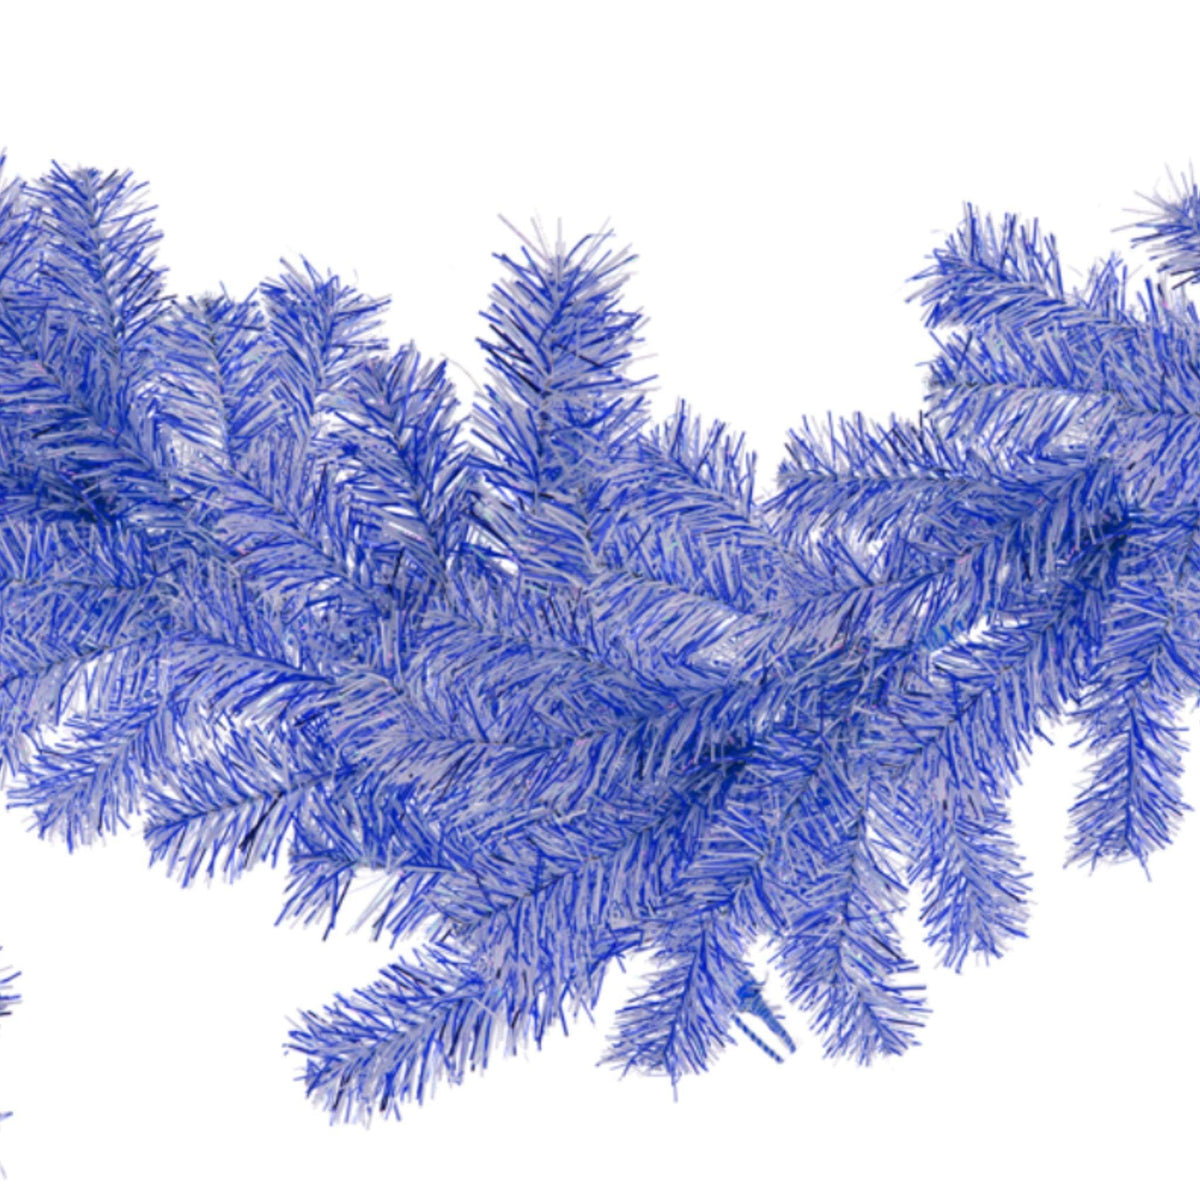 Buy Lee Display's 6FT Blue and White Tinsel Christmas Brush Garlands.  On sale now at leedisplay.com.  Middle Section